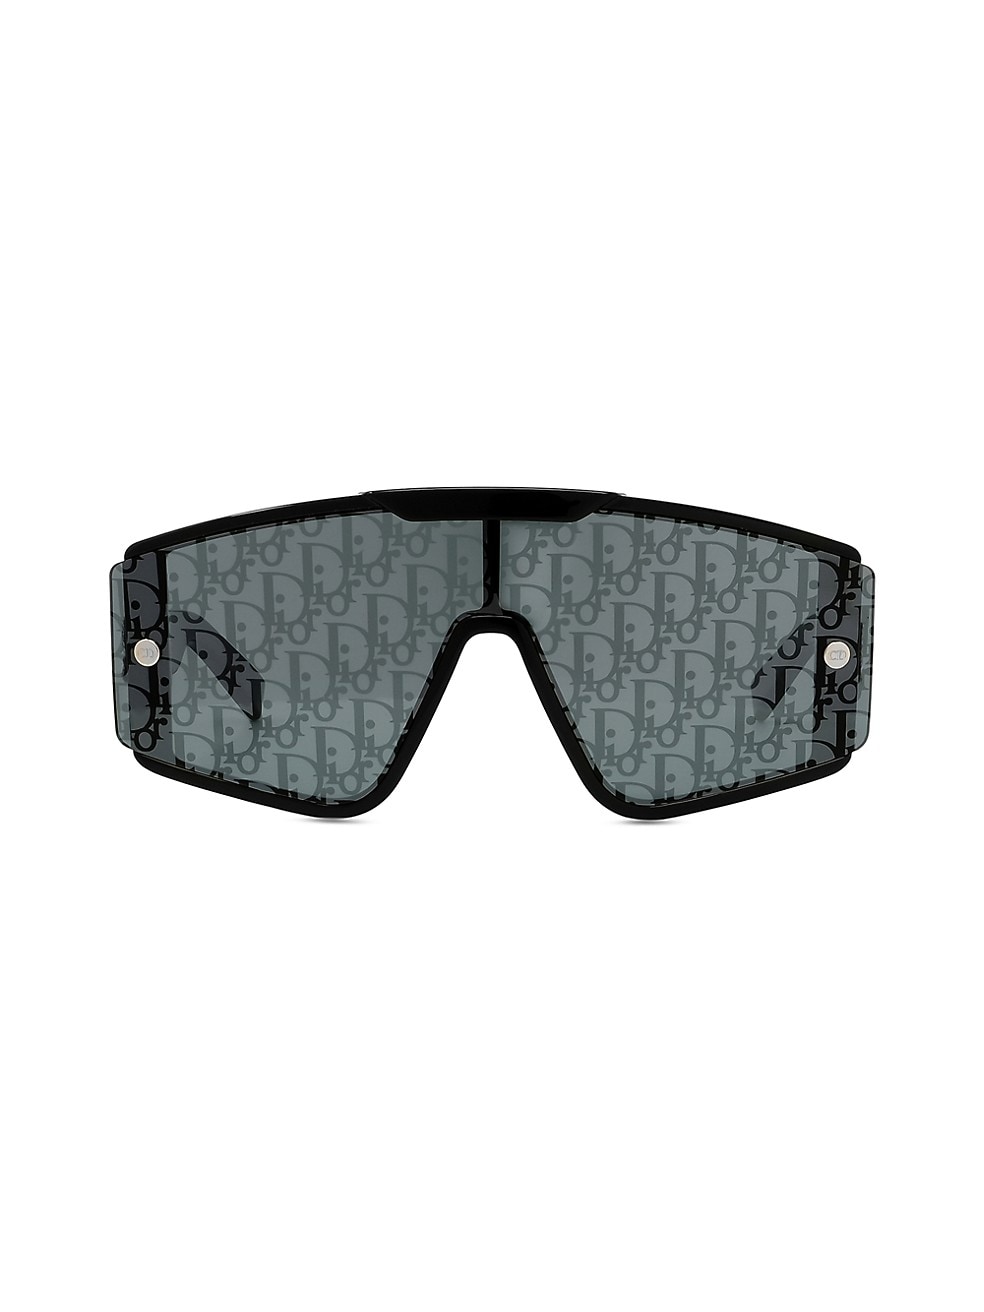 Dior Homme Diorxtrem SI Injected Mask Sunglasses